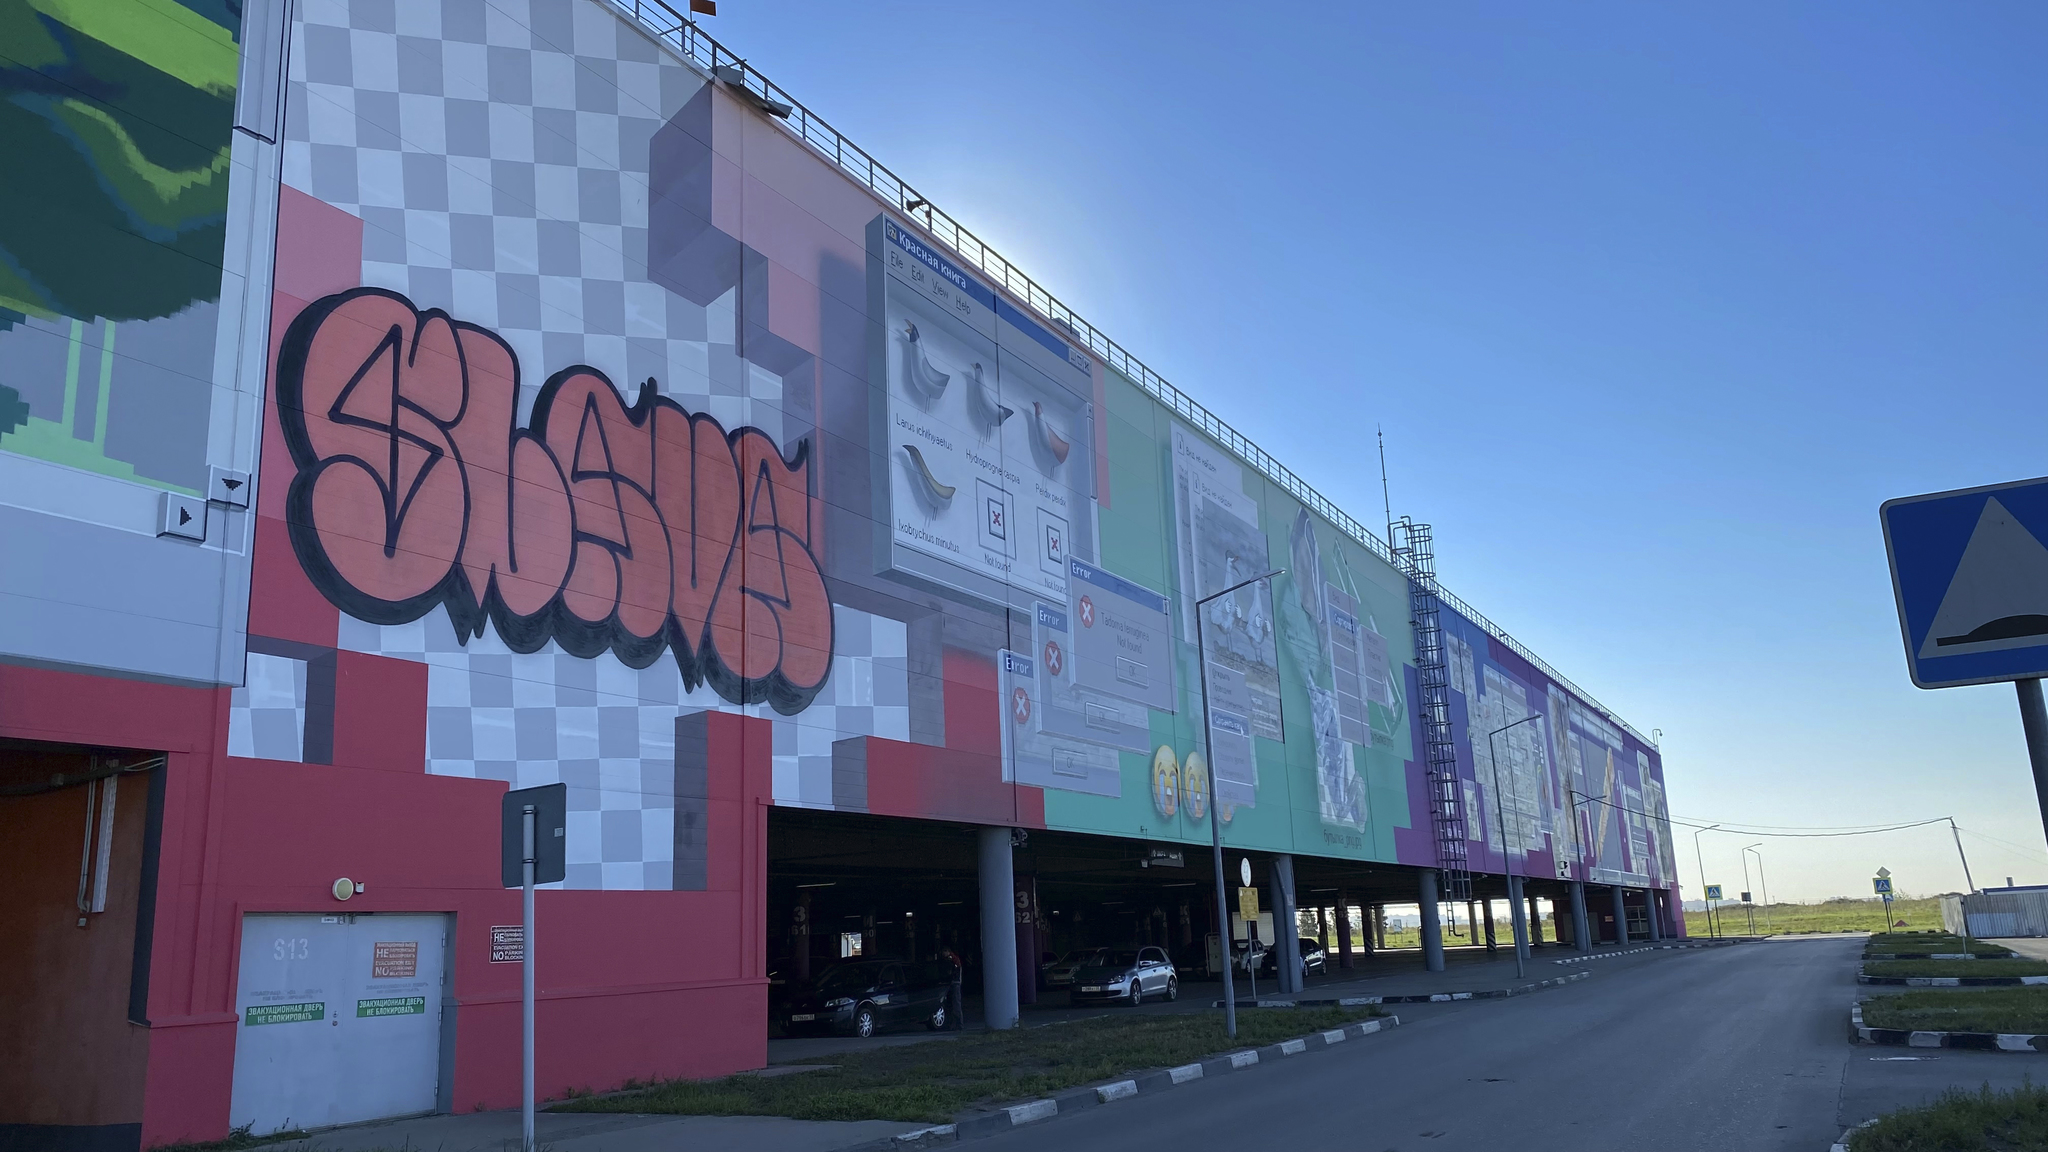 Continuation of the post “In Omsk, the huge wall of Mega “glitched”” - Omsk, Street art, Graffiti, Mega, Windows, Error, Bomber, Video, Reply to post, Longpost, Vandalism